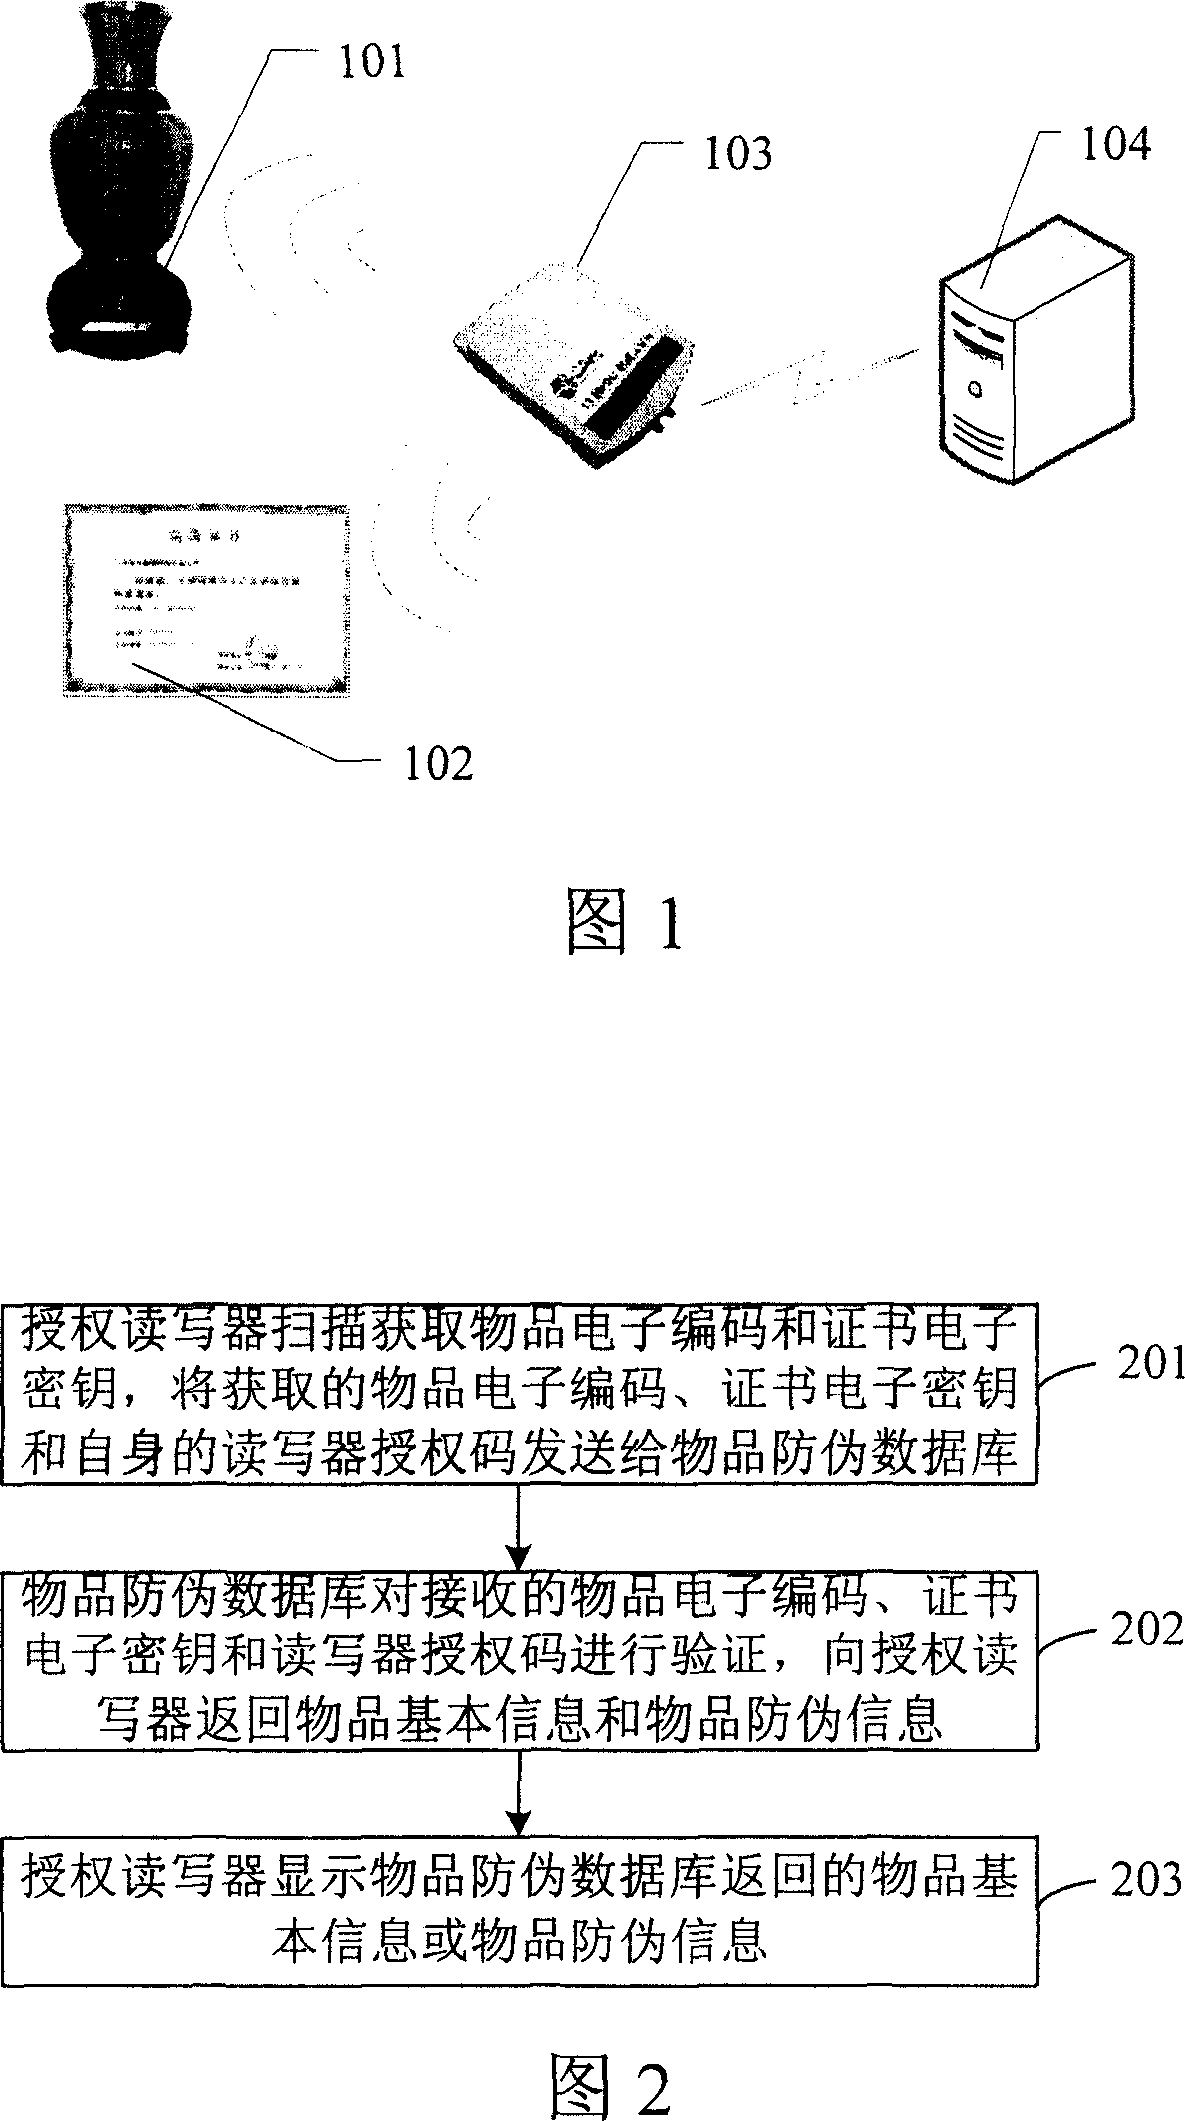 System and method for antiforge of article with certificate based on radio frequency technology